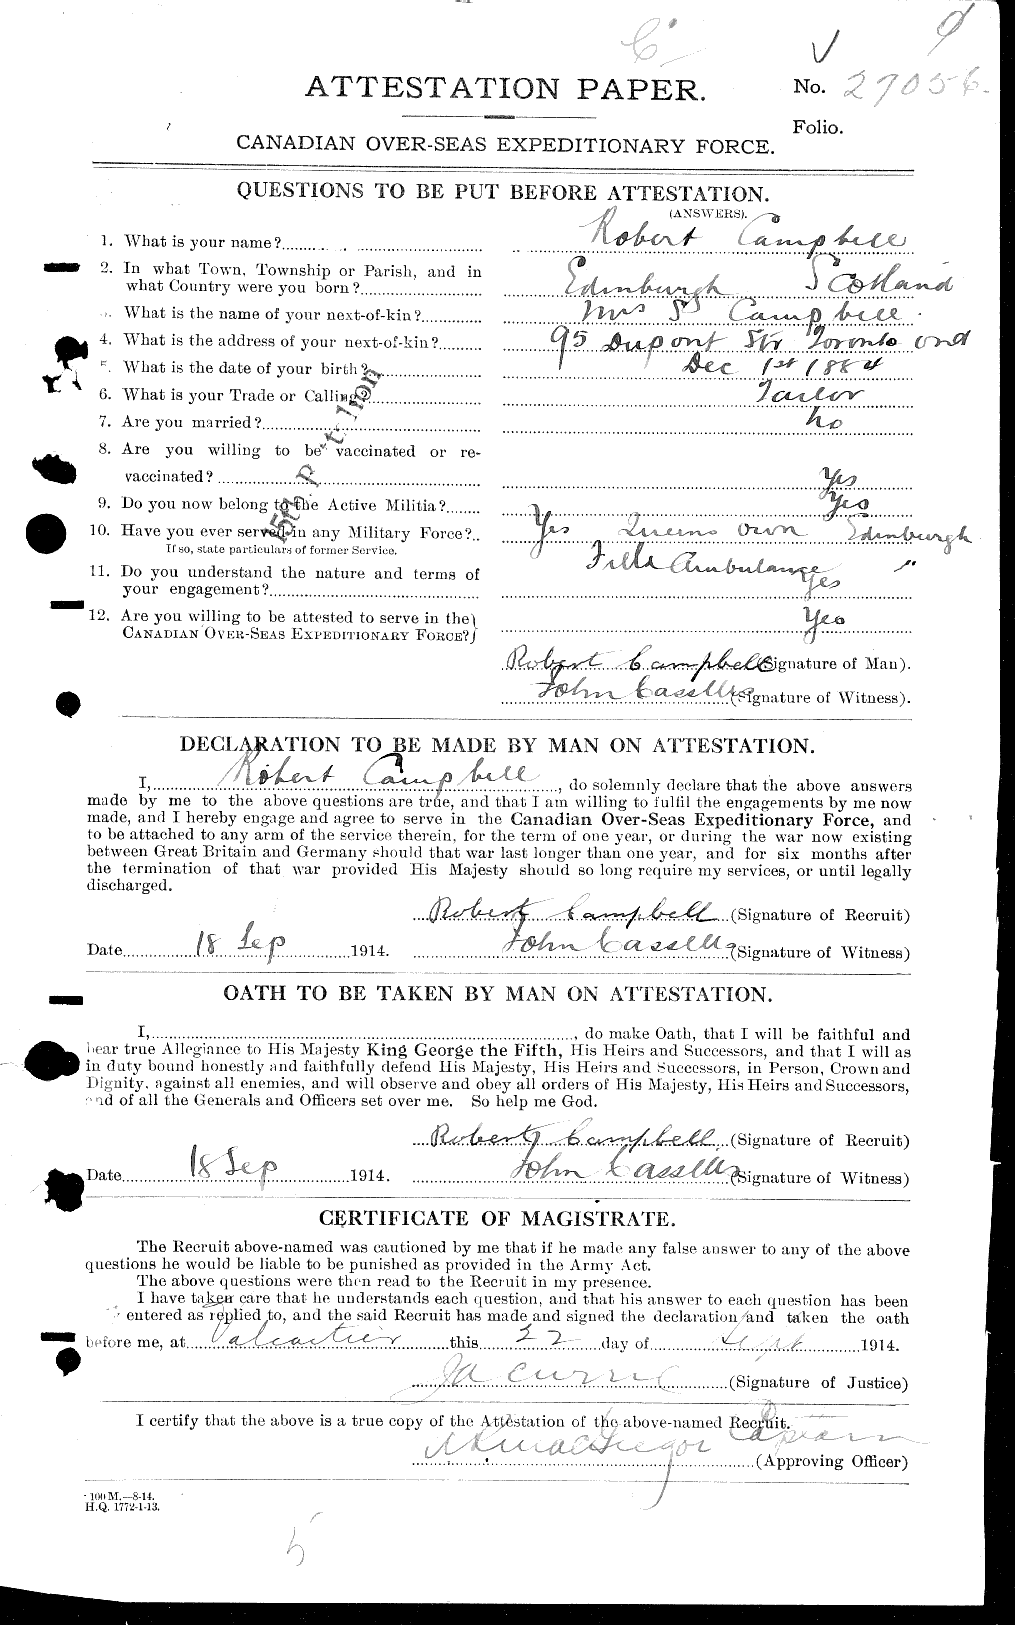 Personnel Records of the First World War - CEF 003819a